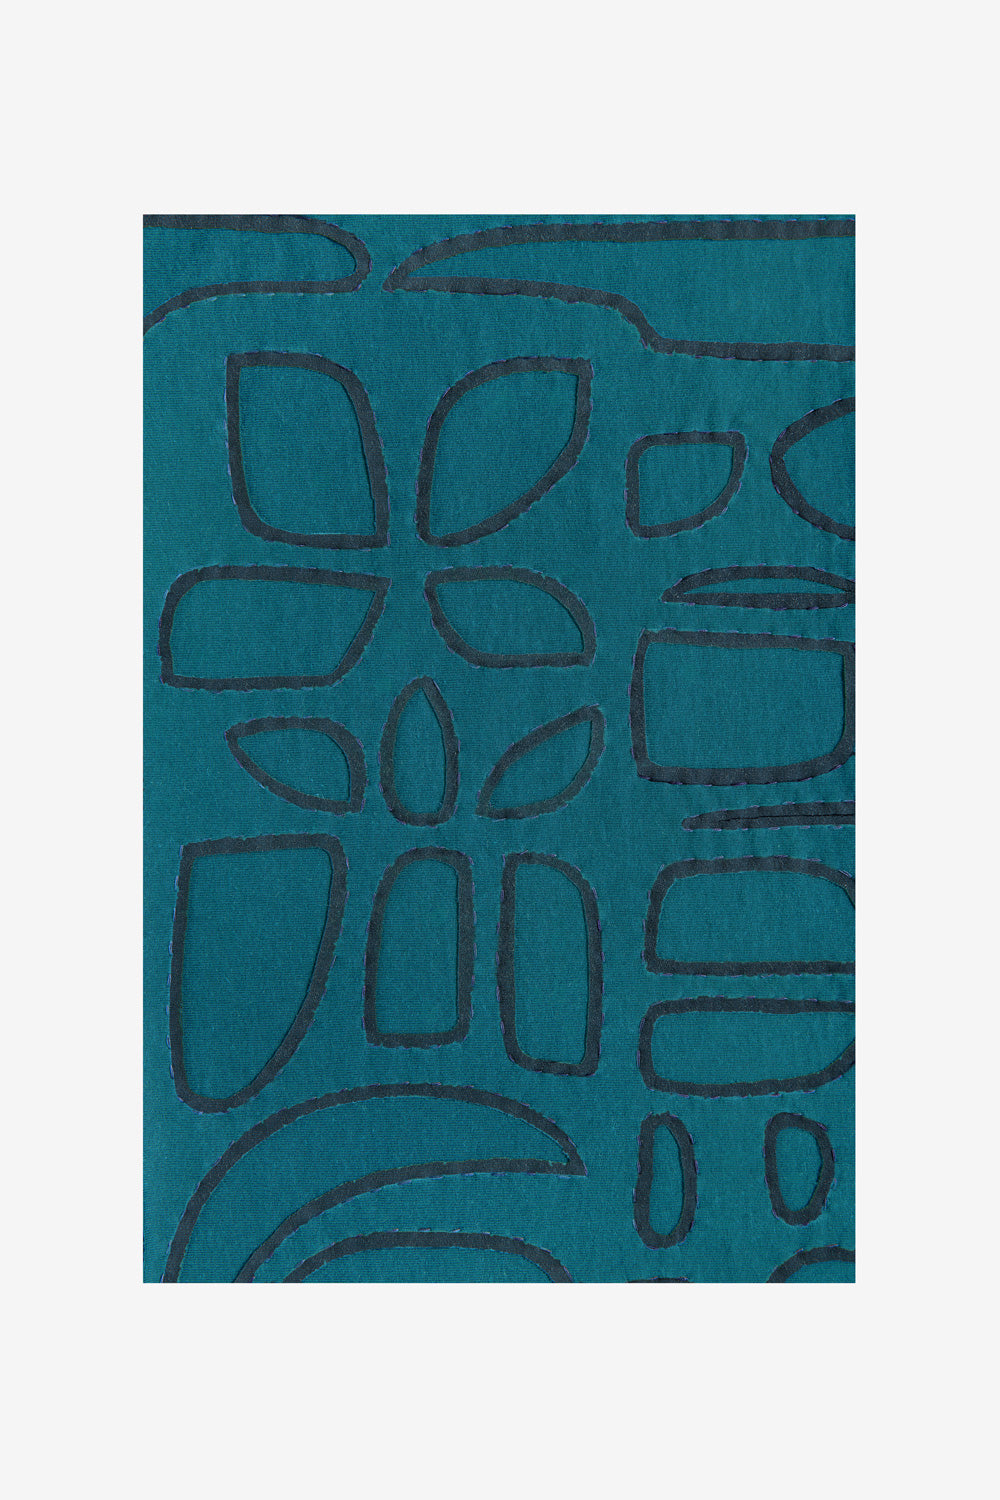 Fabric swatch with Tony stencil design in reverse appliqué on Teal fabric..